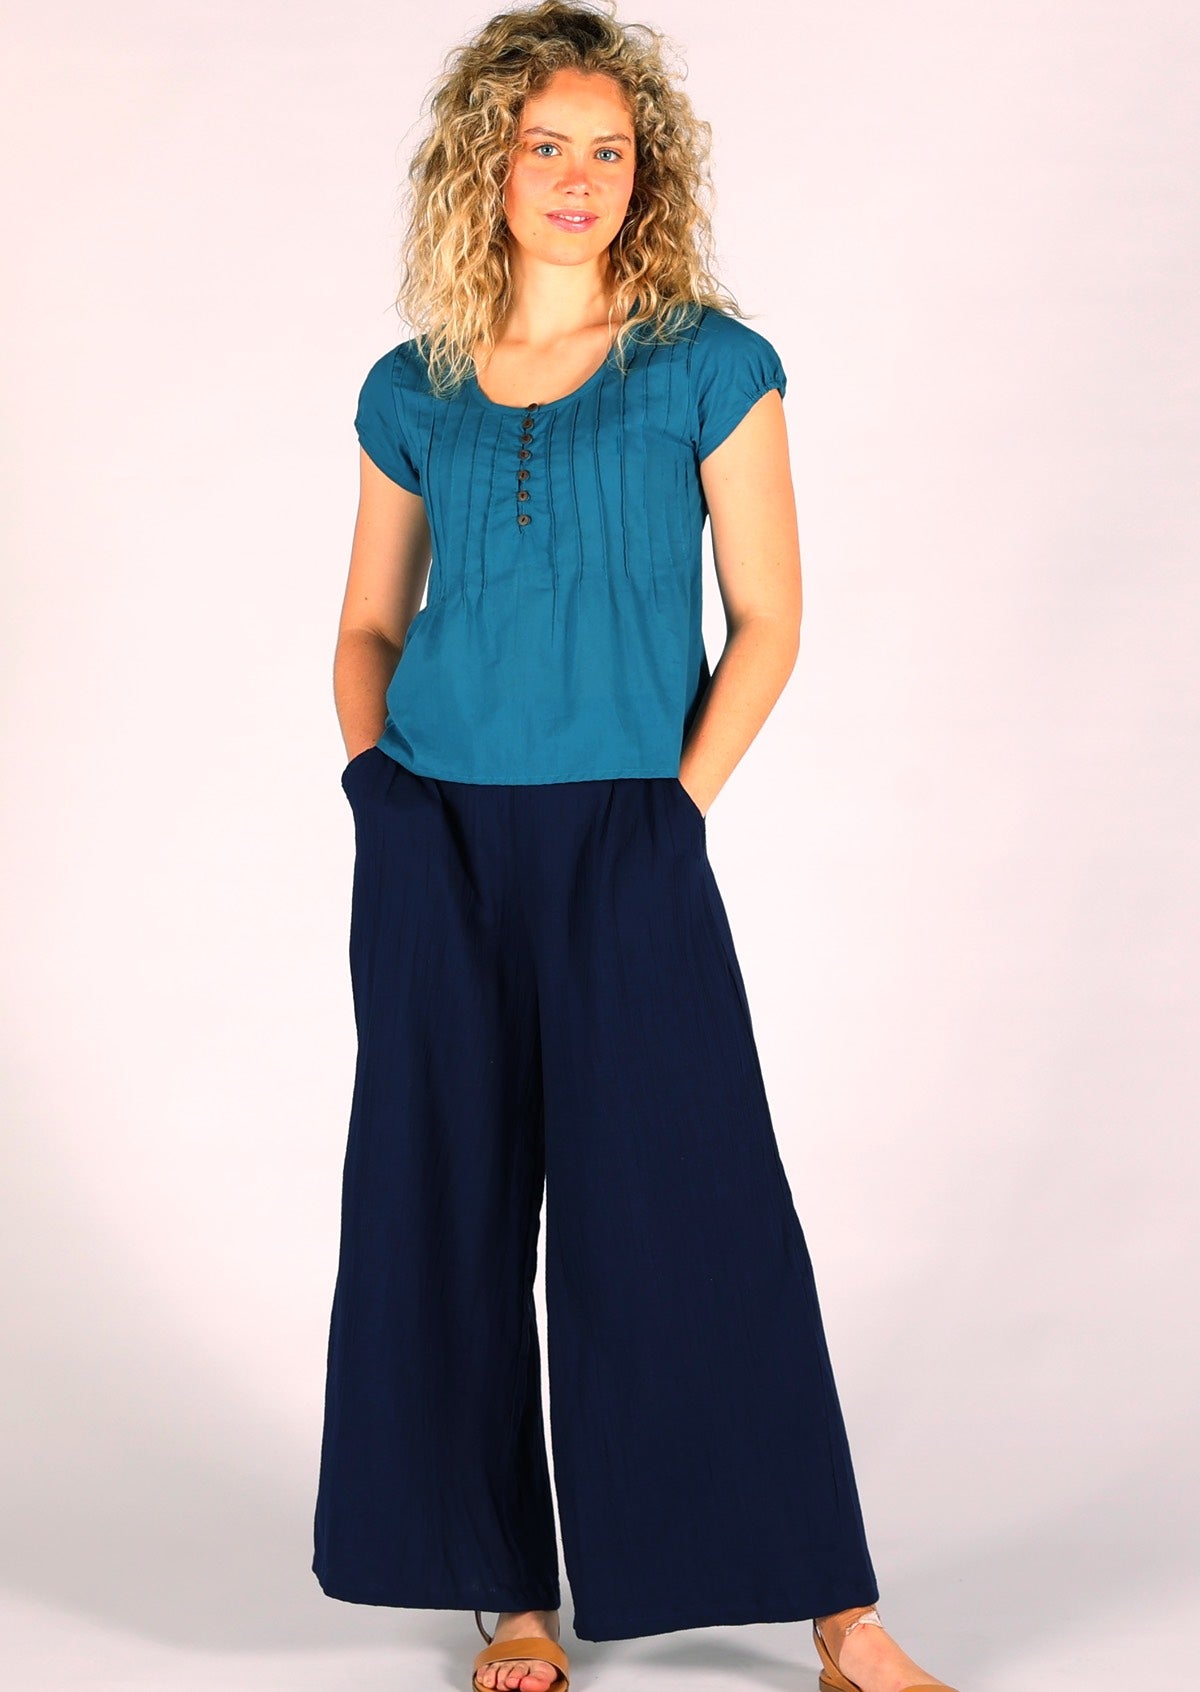 Dark blue pants made from two layers of lightweight cotton gauze